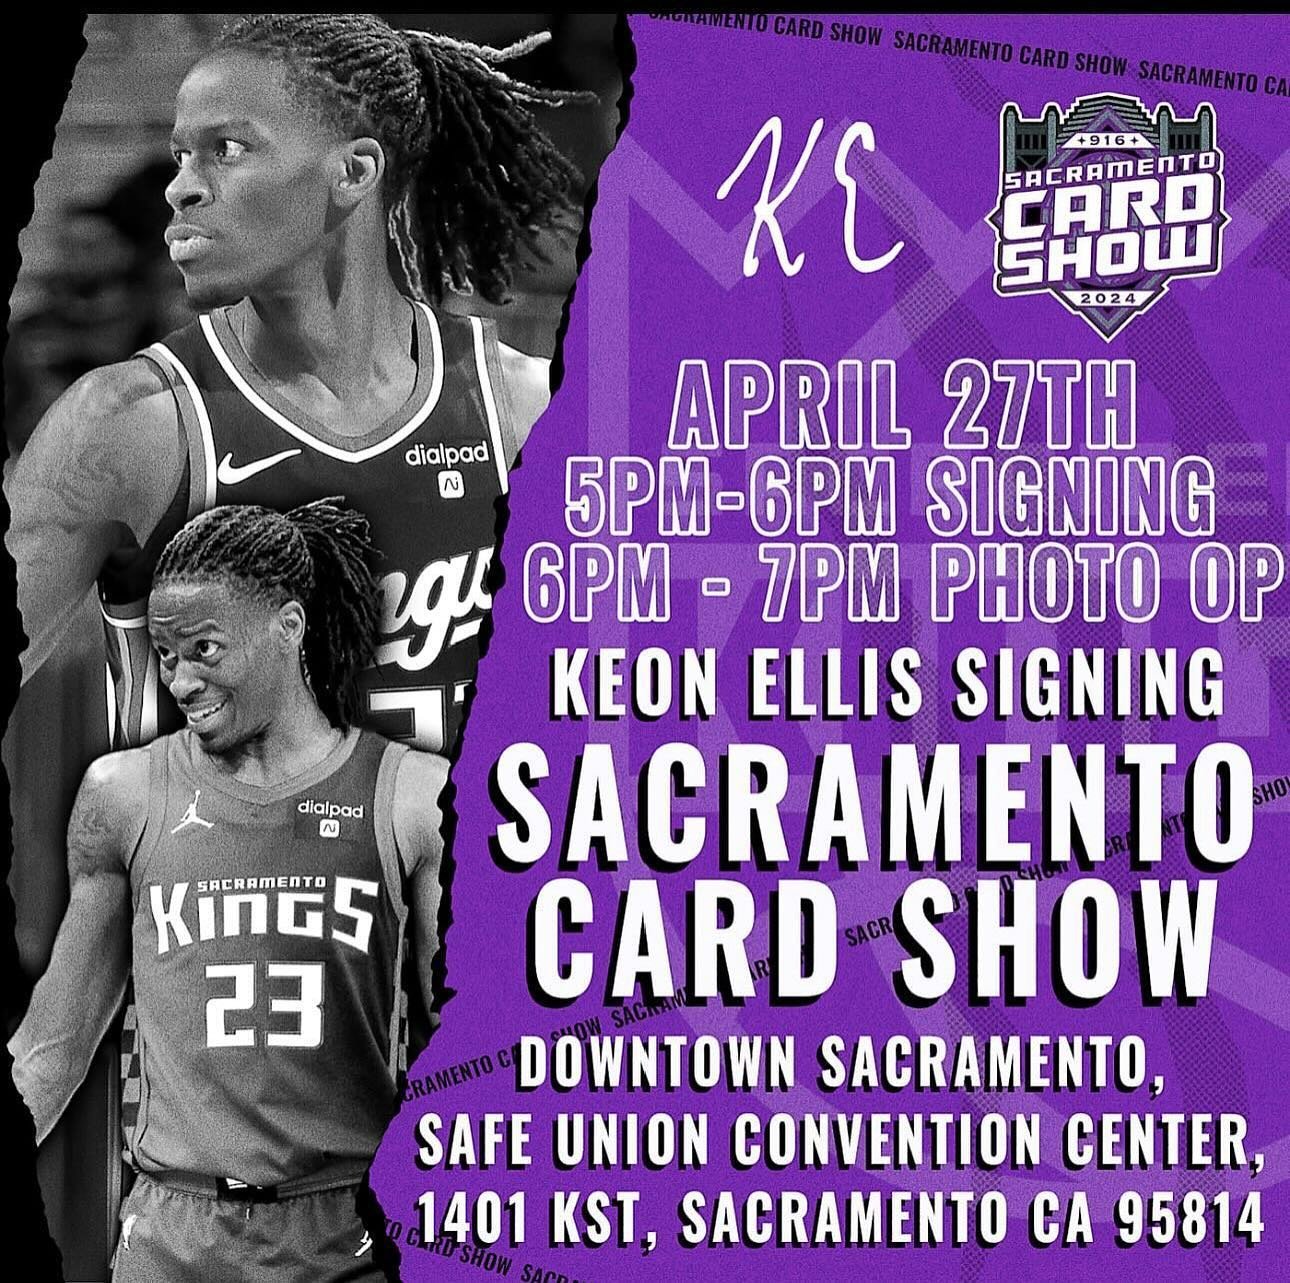 Don&rsquo;t forget we have @kkeon4 signing autographs here at the show at 5PM PST!